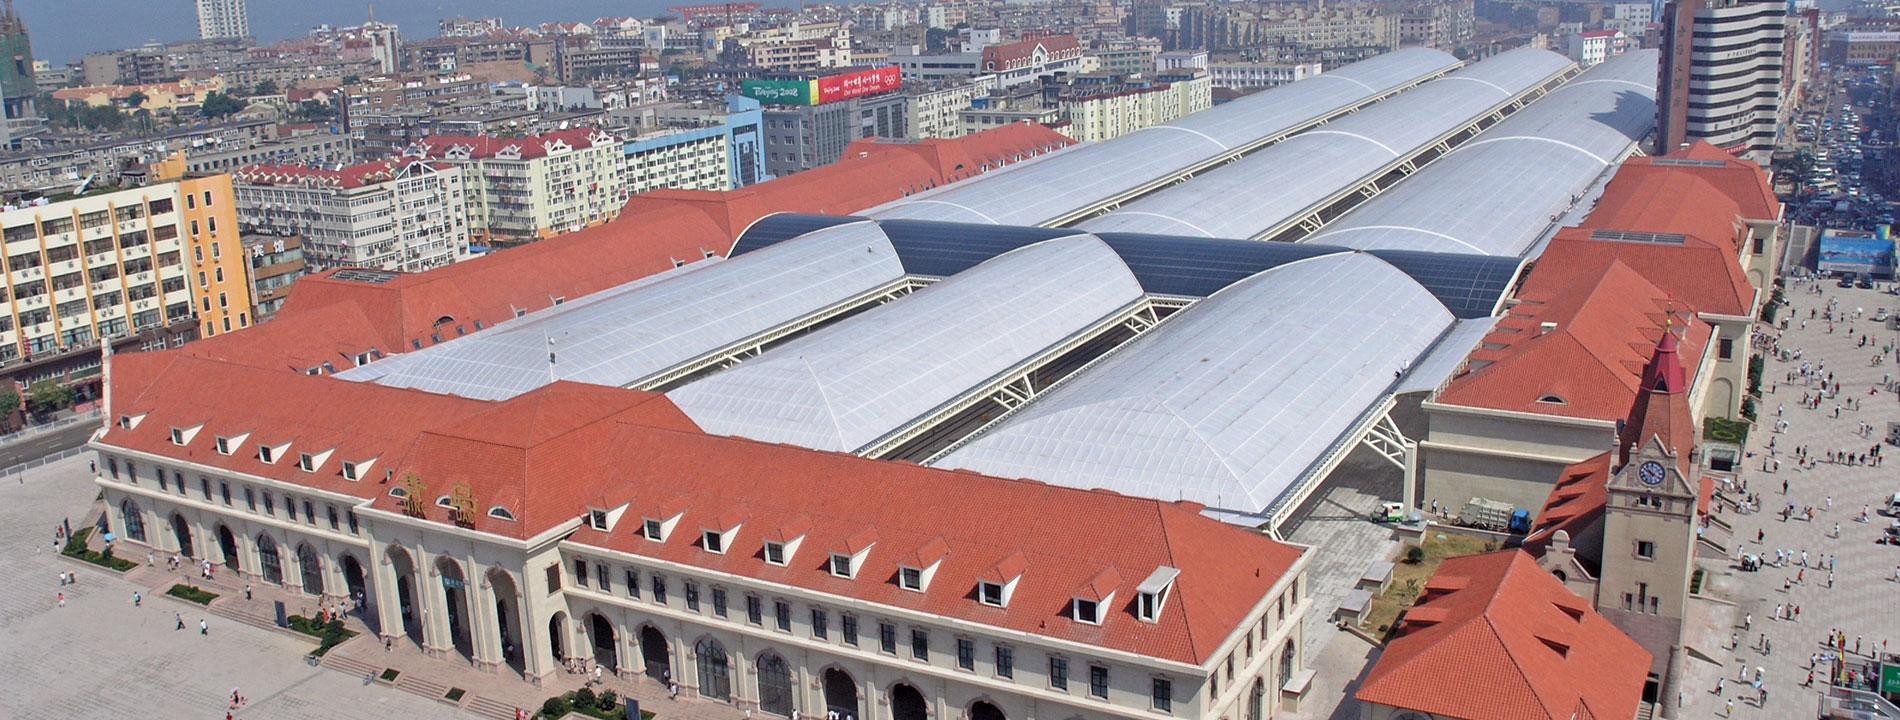 PALSUN® Flat Solid Polycarbonate Panel roofing at the Qingdao Railway Station, China